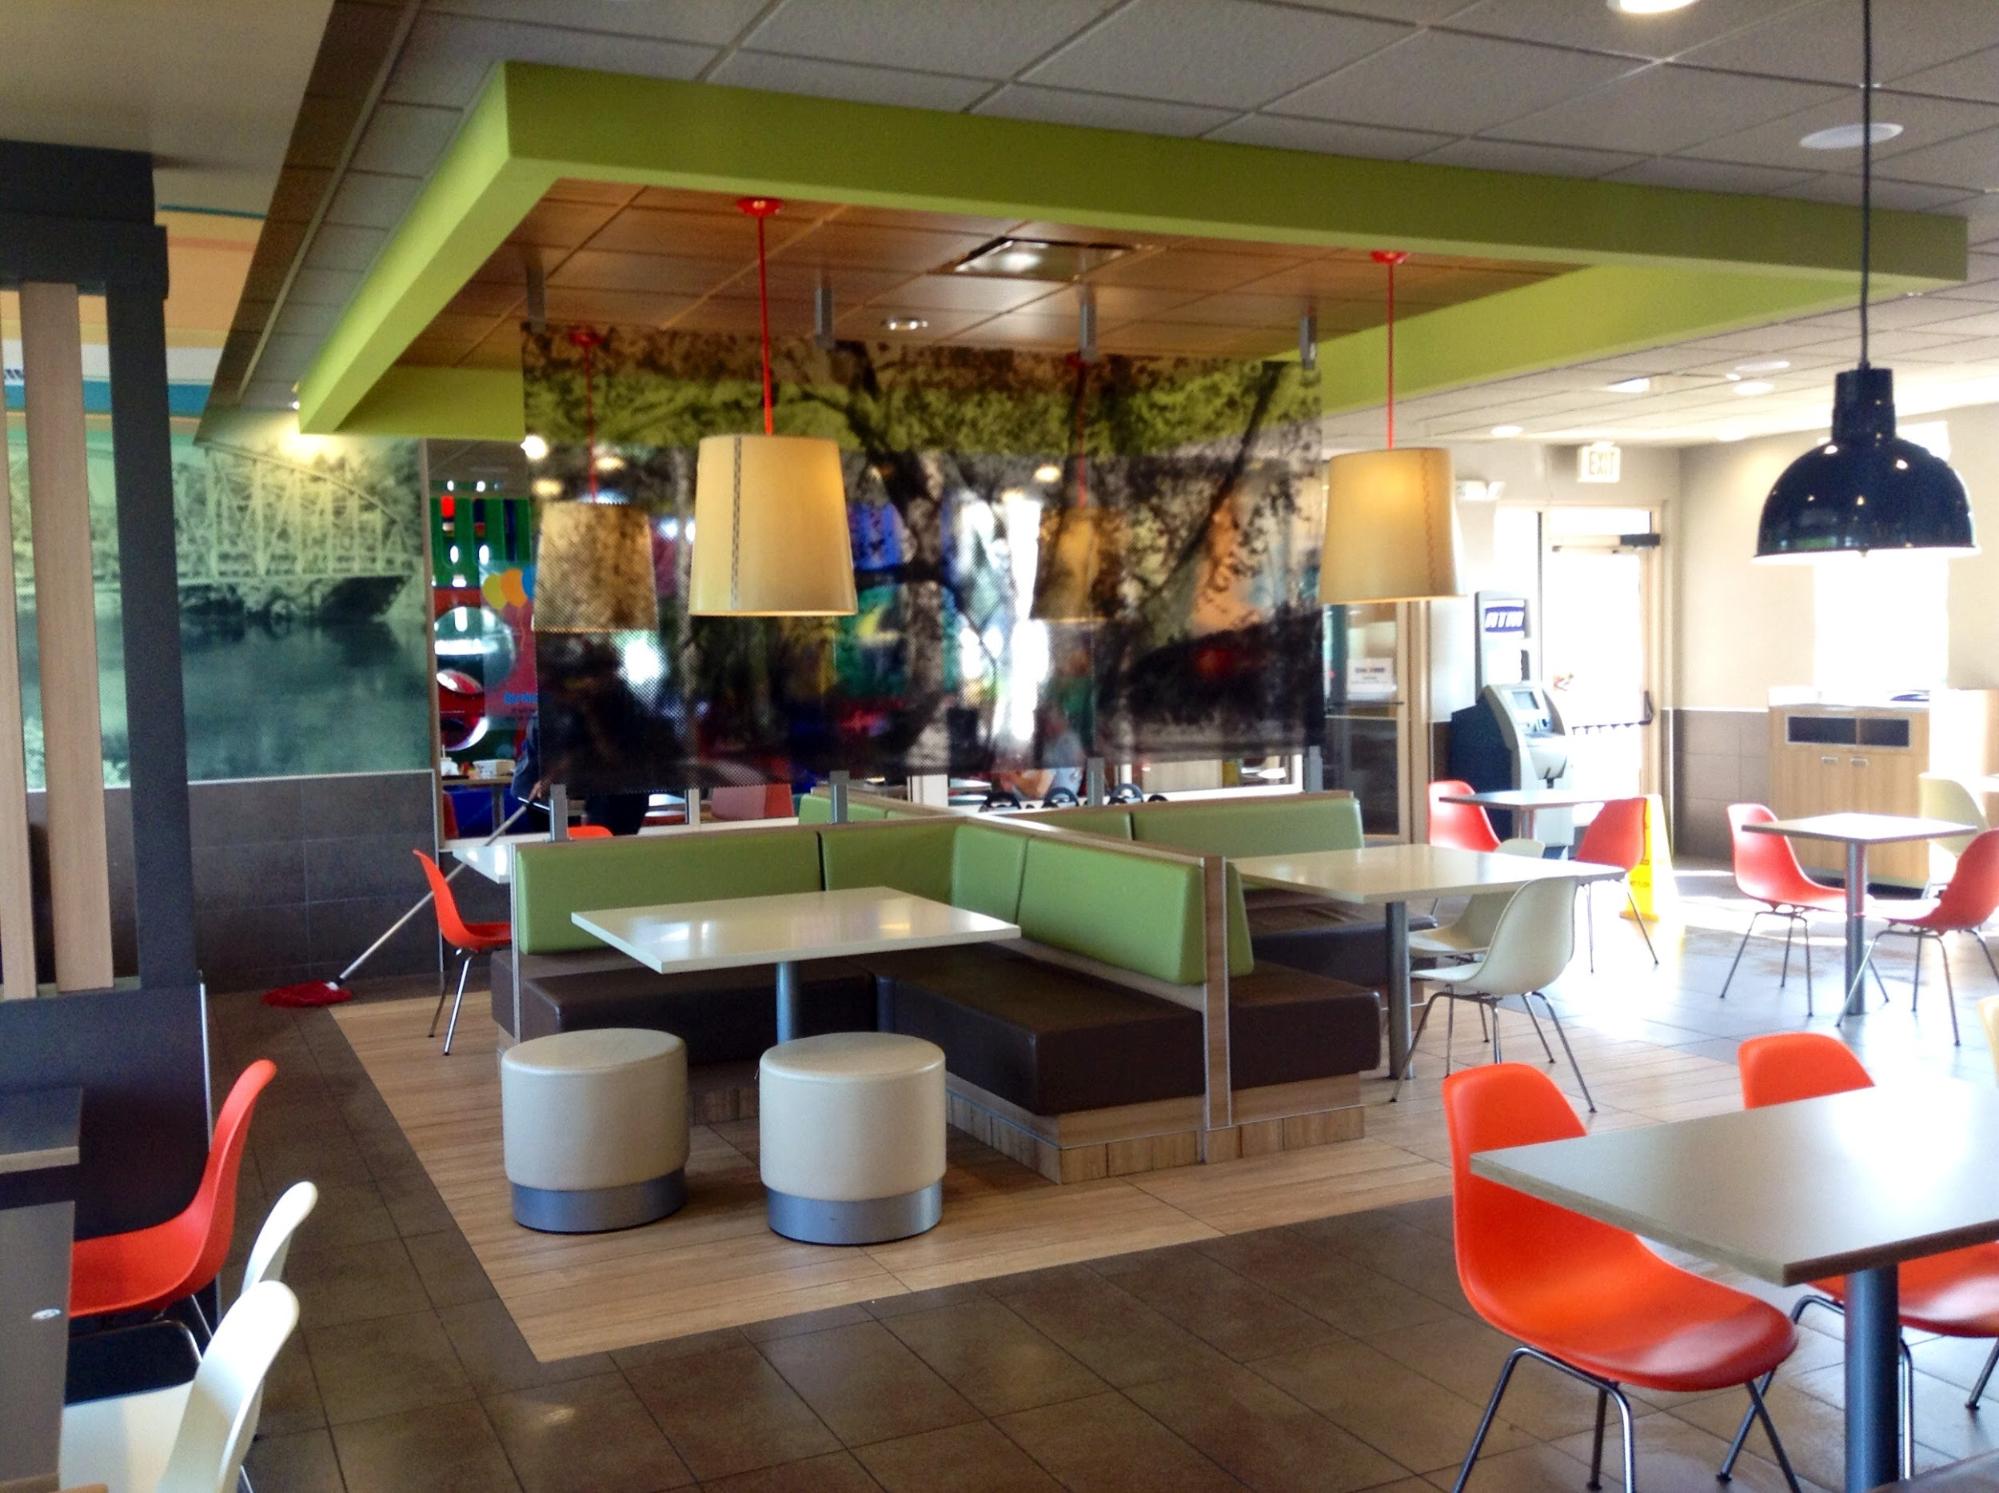 The interior of a McDonald’s in Avon, Connecticut. Photo courtesy Mike Mozart.